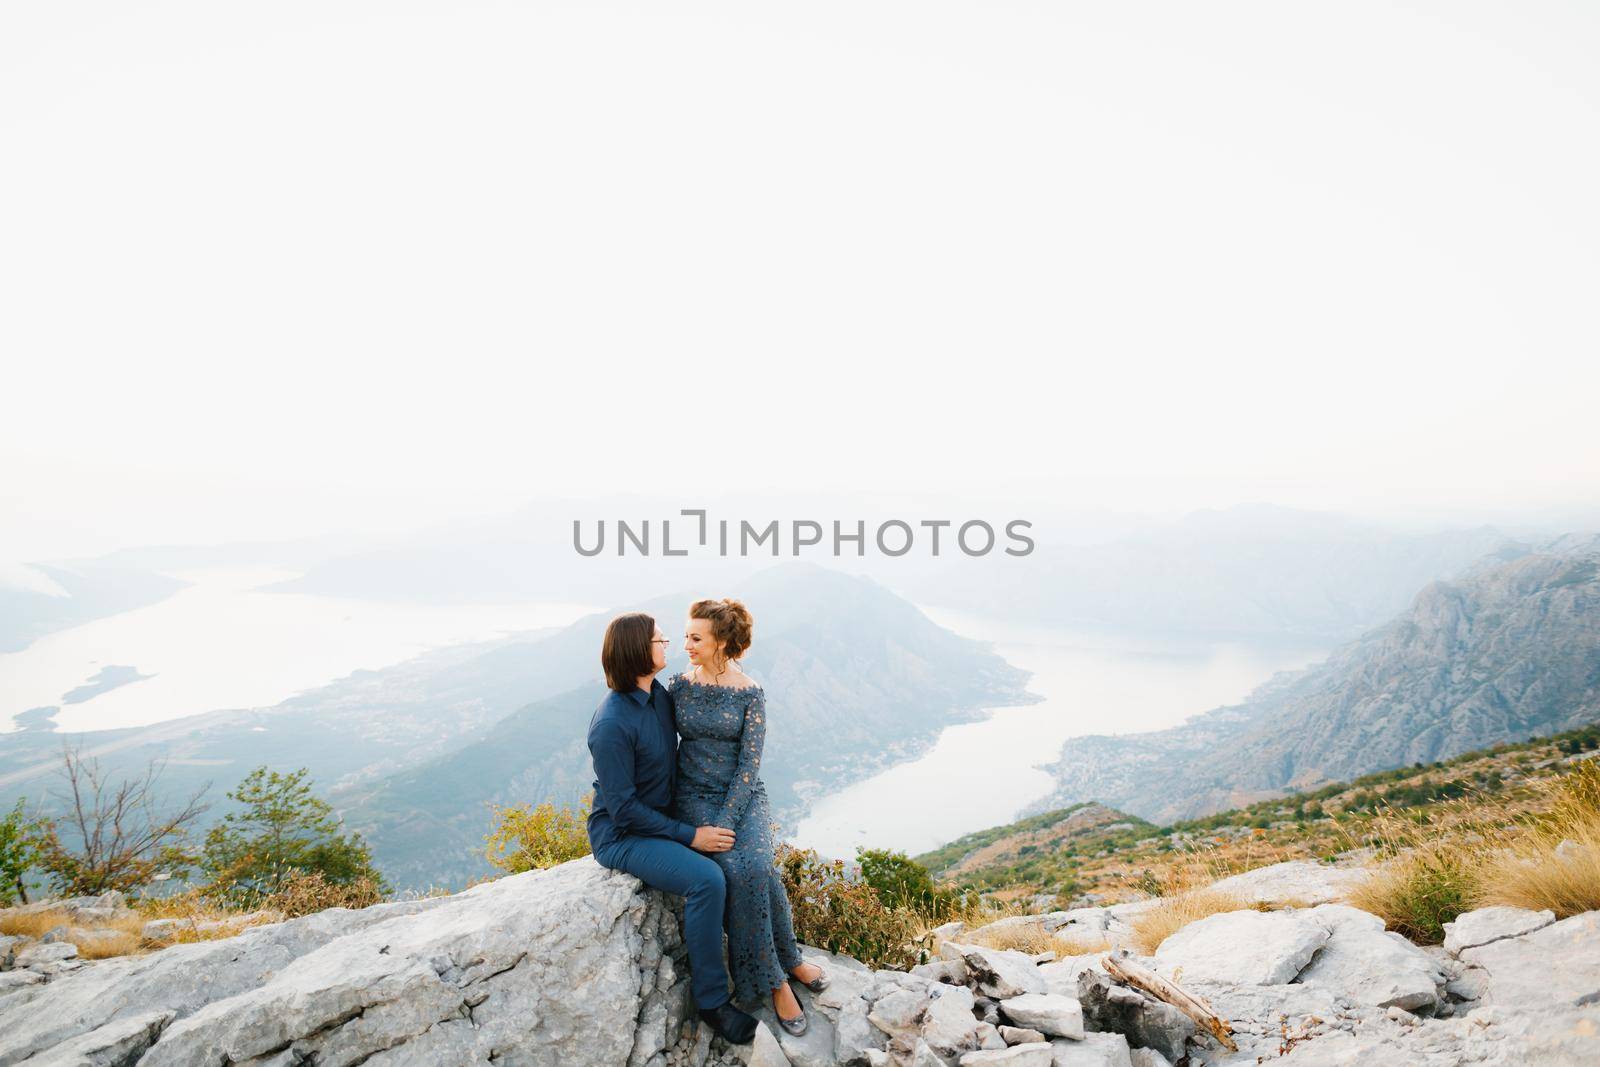 The bride and groom sitting embracing on the Lovcen mountain behind them opens a view of the Bay of Kotor by Nadtochiy